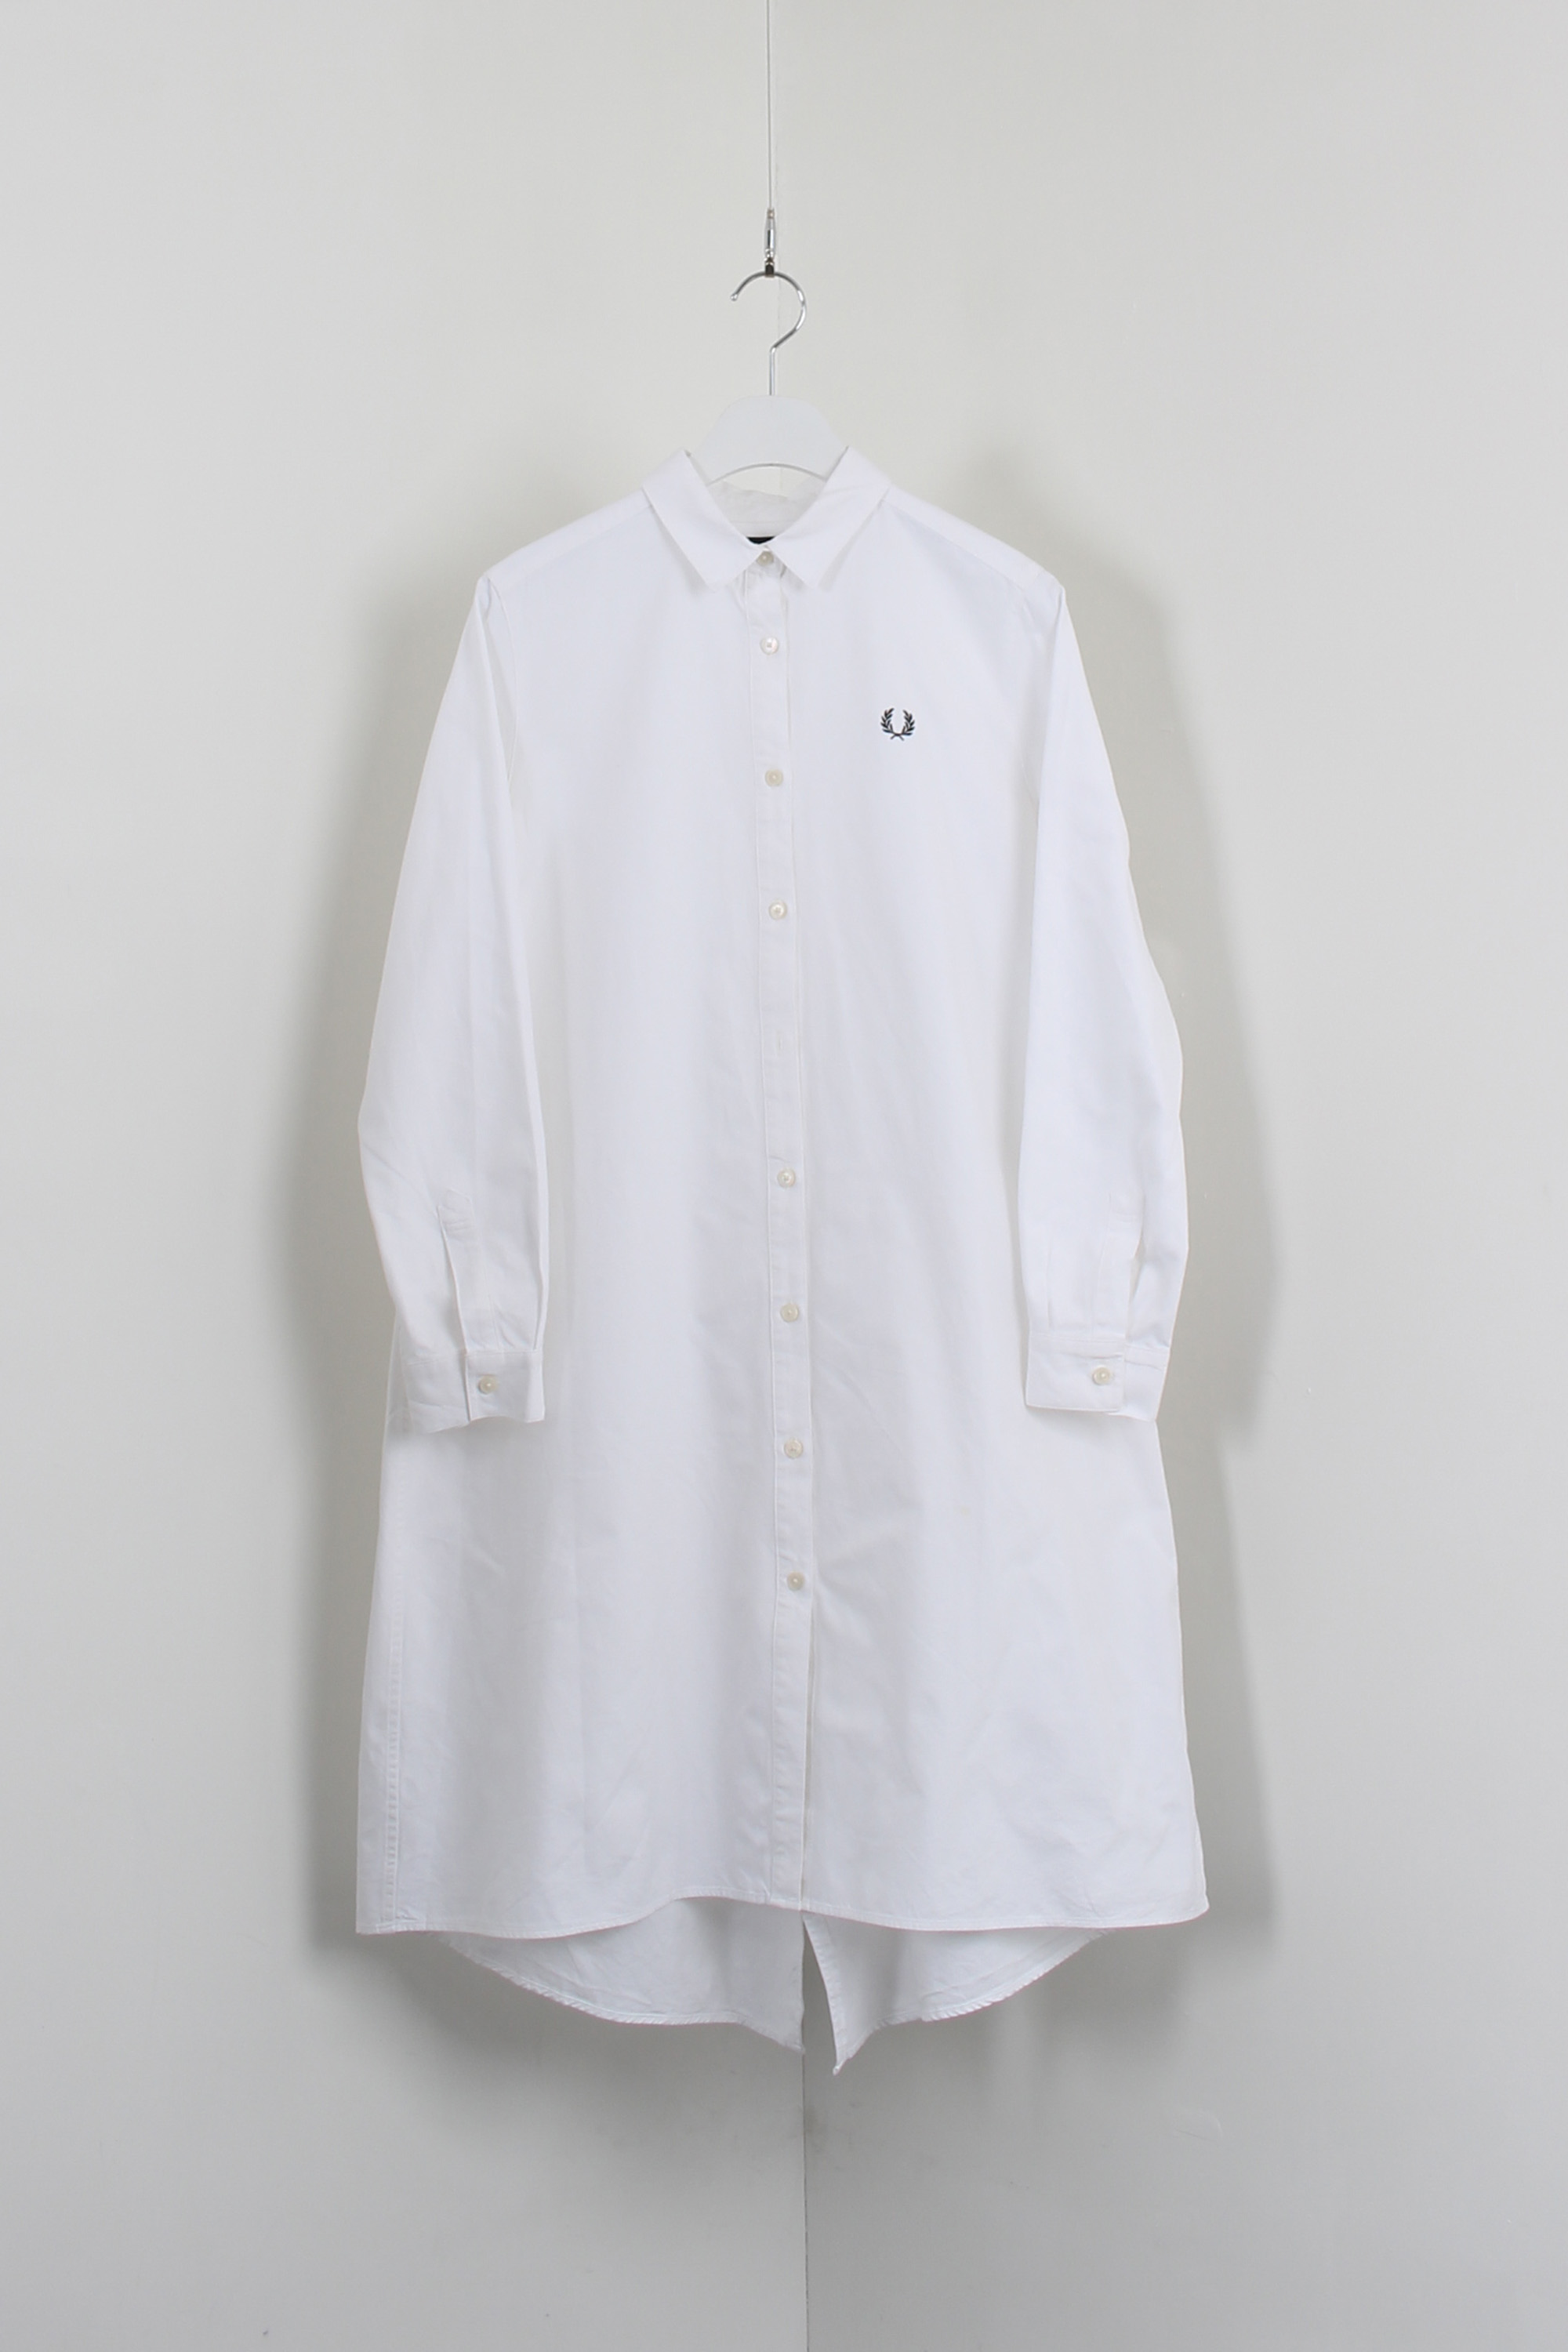 FRED PERRY shirt one piece